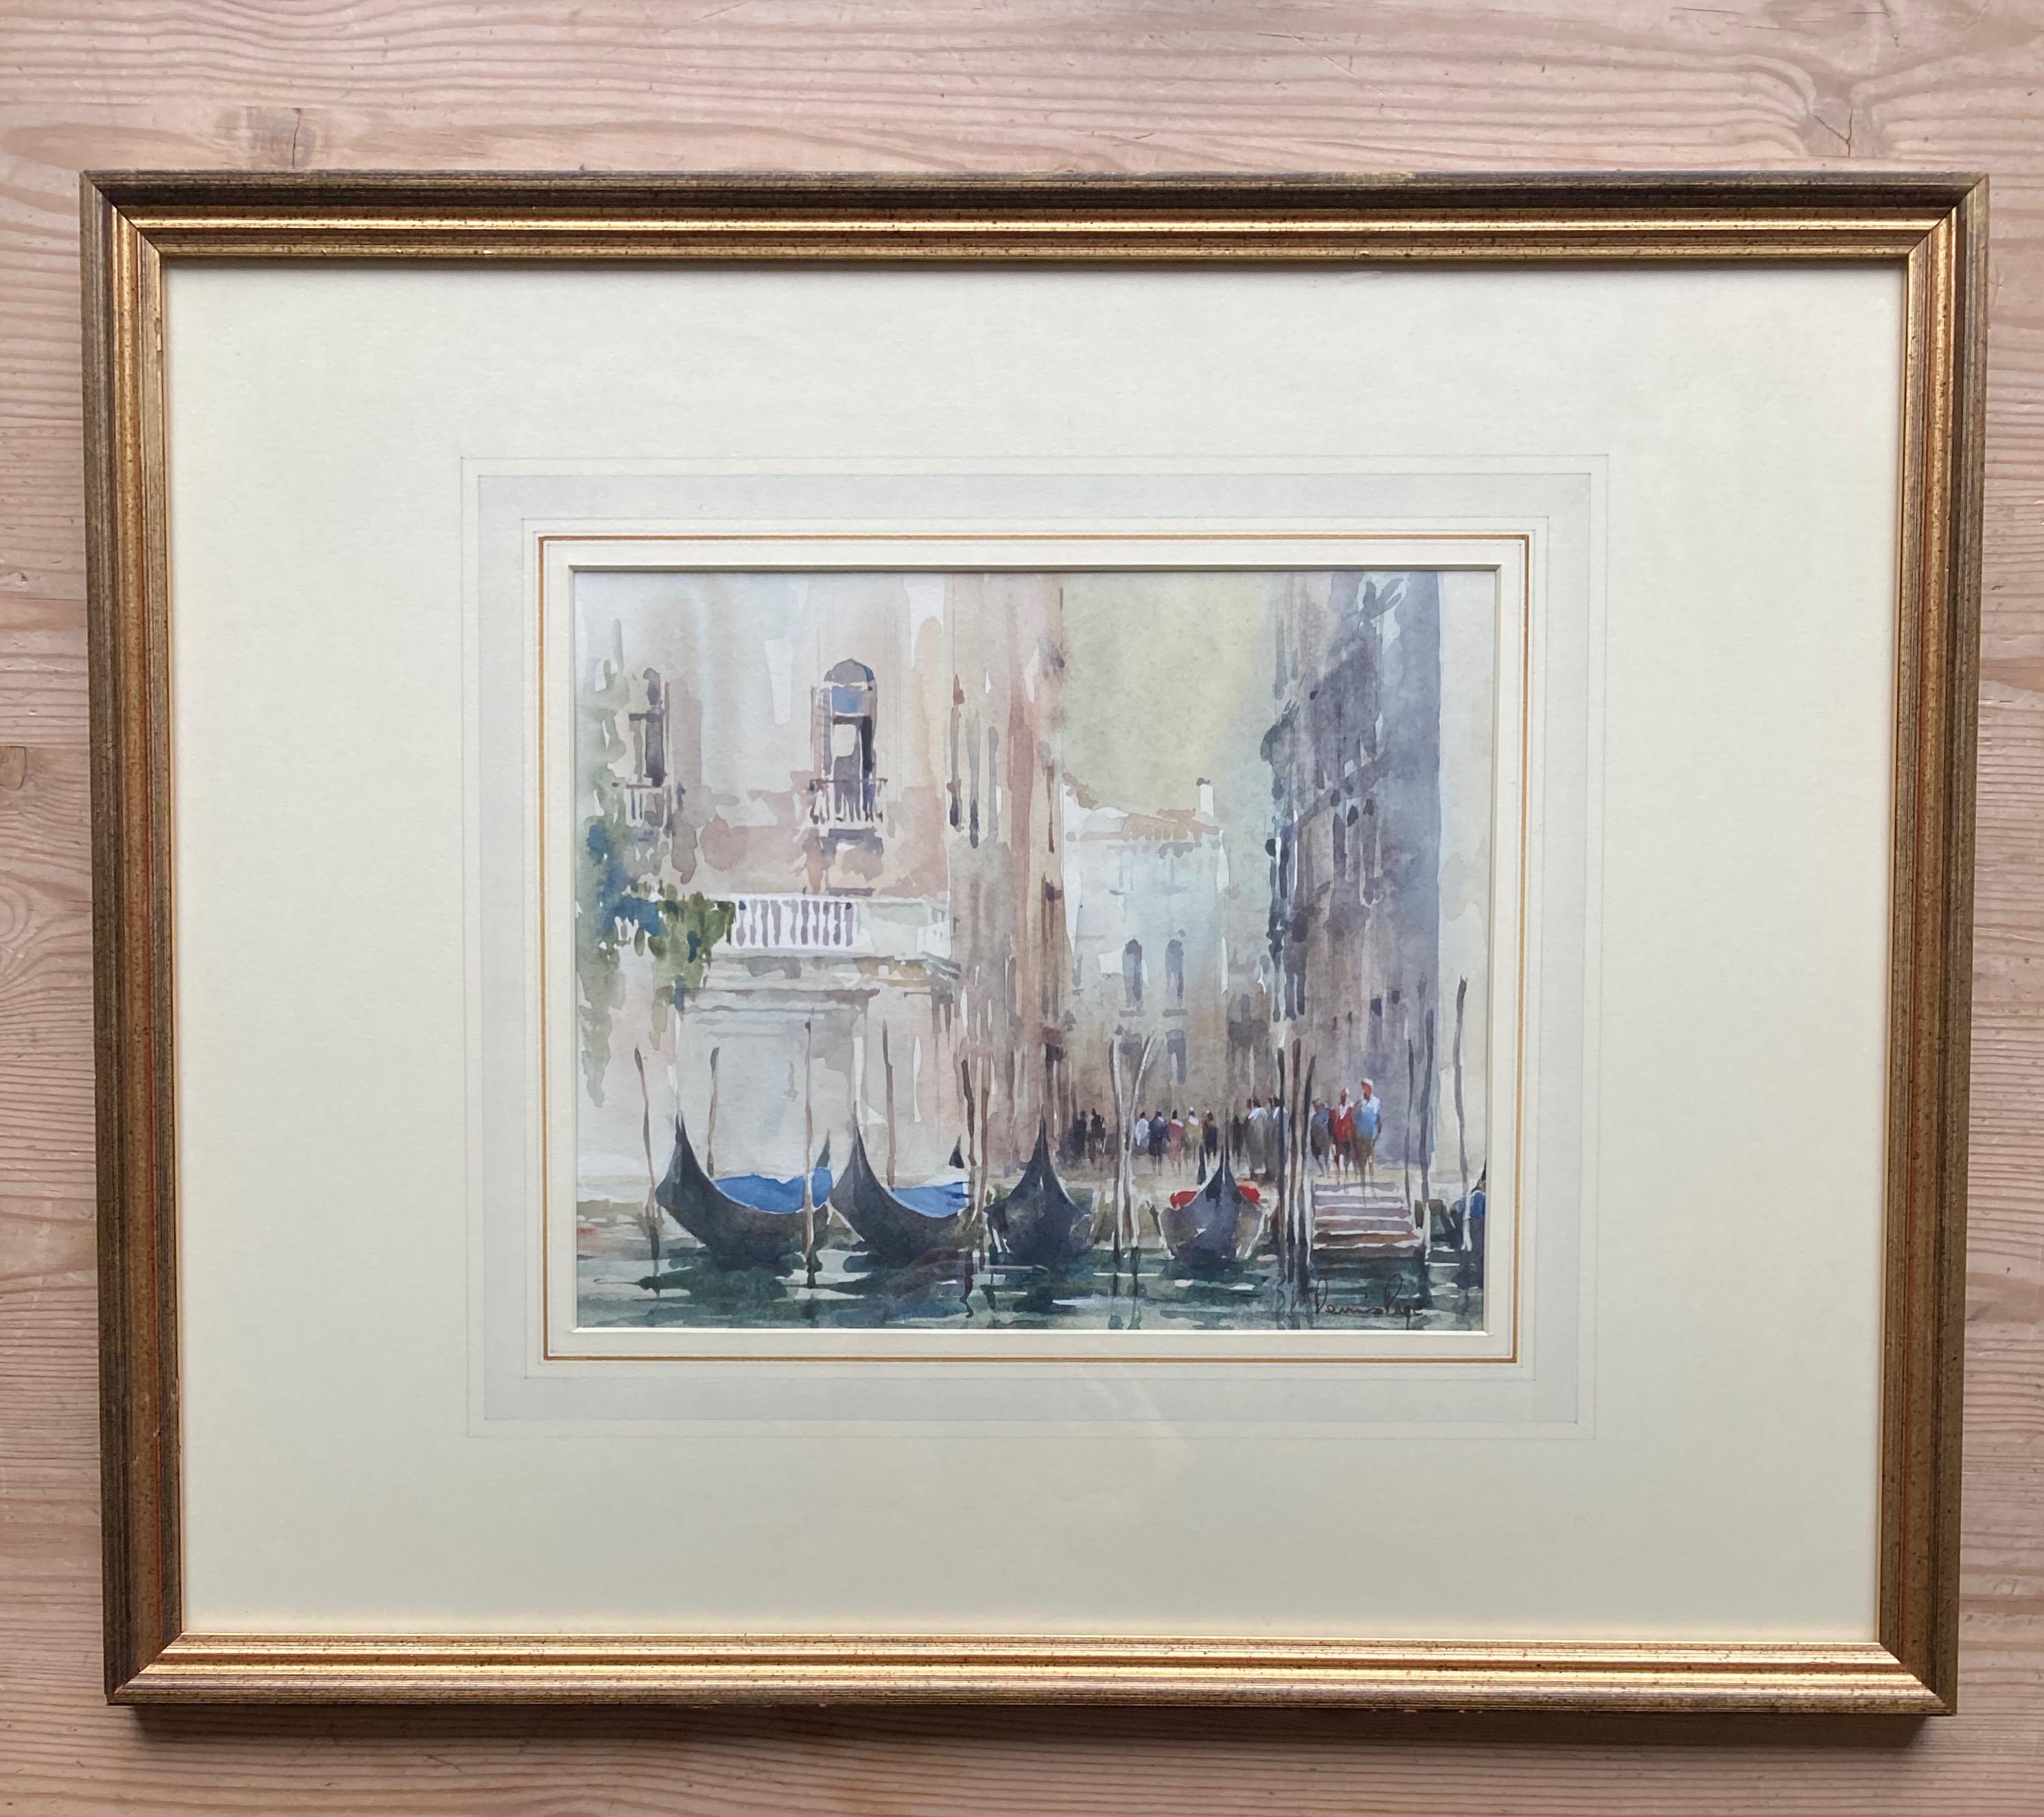 A very atmospheric watercolour capturing the light and shimmer of a Venetian canal. One of two views of Venice by the artist that I am offering  - please see my other listing.

Dennis Page (born 1926)
Gondolas Venice
Signed
Watercolour
8½ x 10½